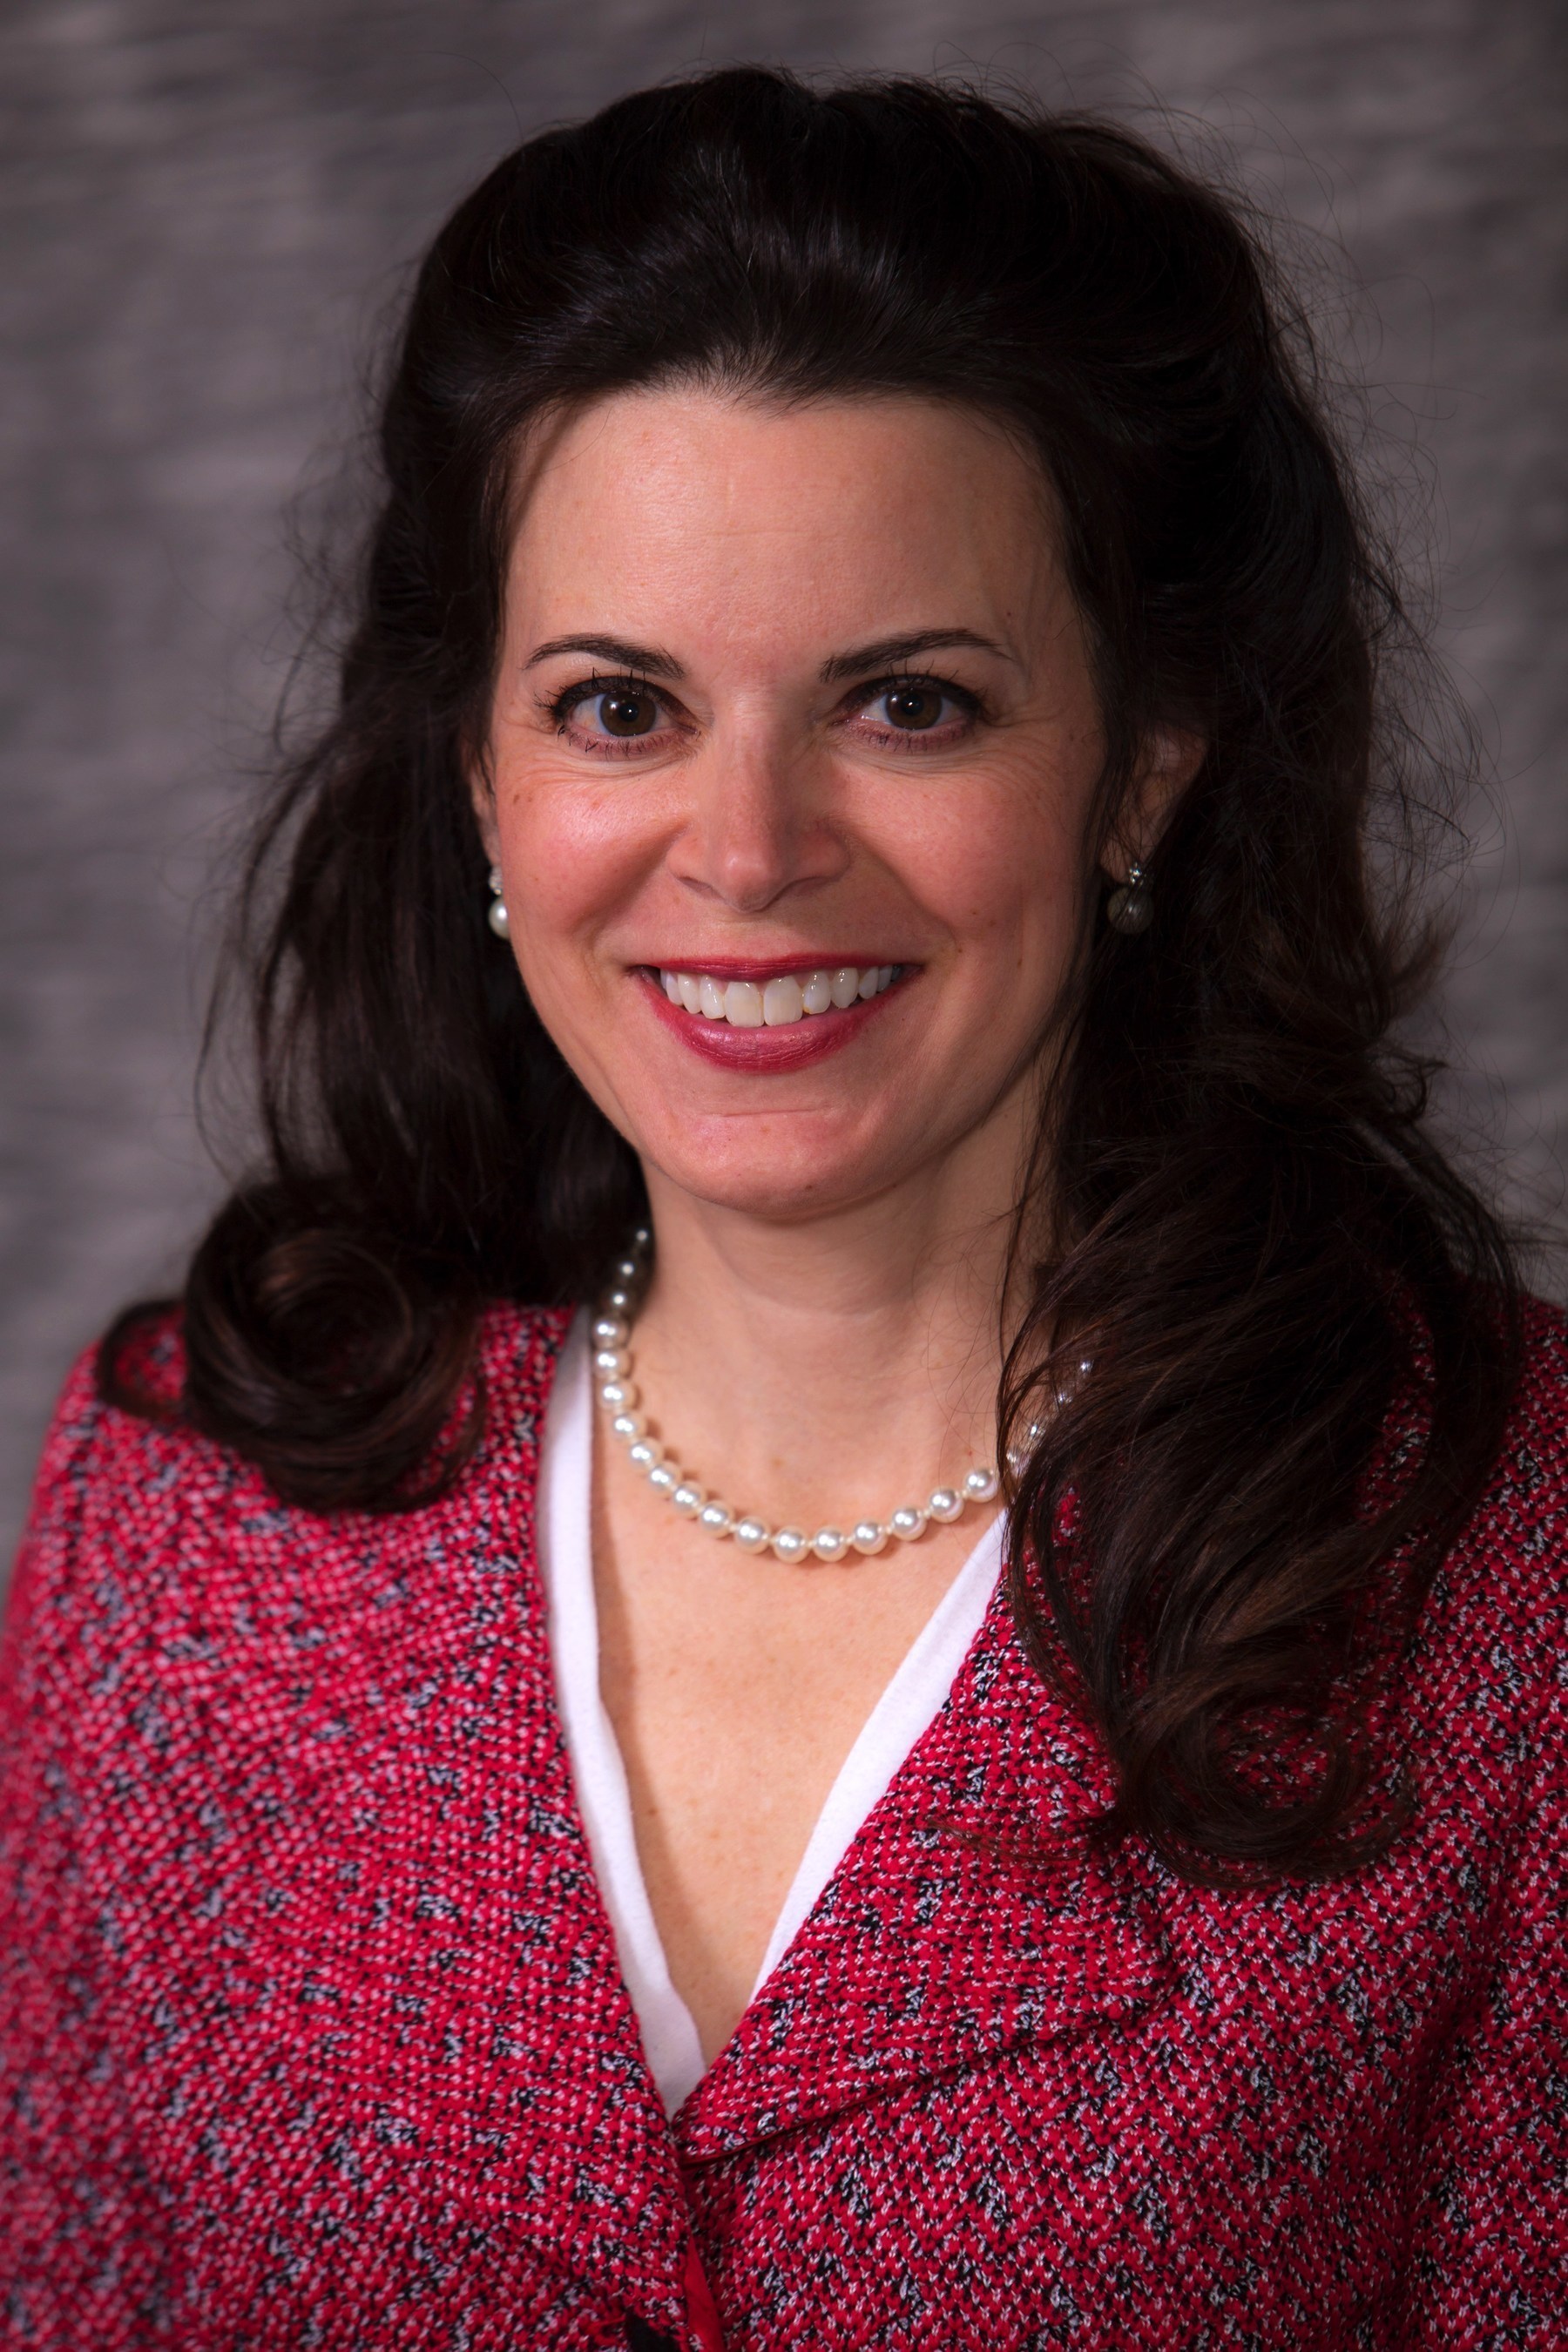 Laura Flanagan, new President and CEO of Foster Farms